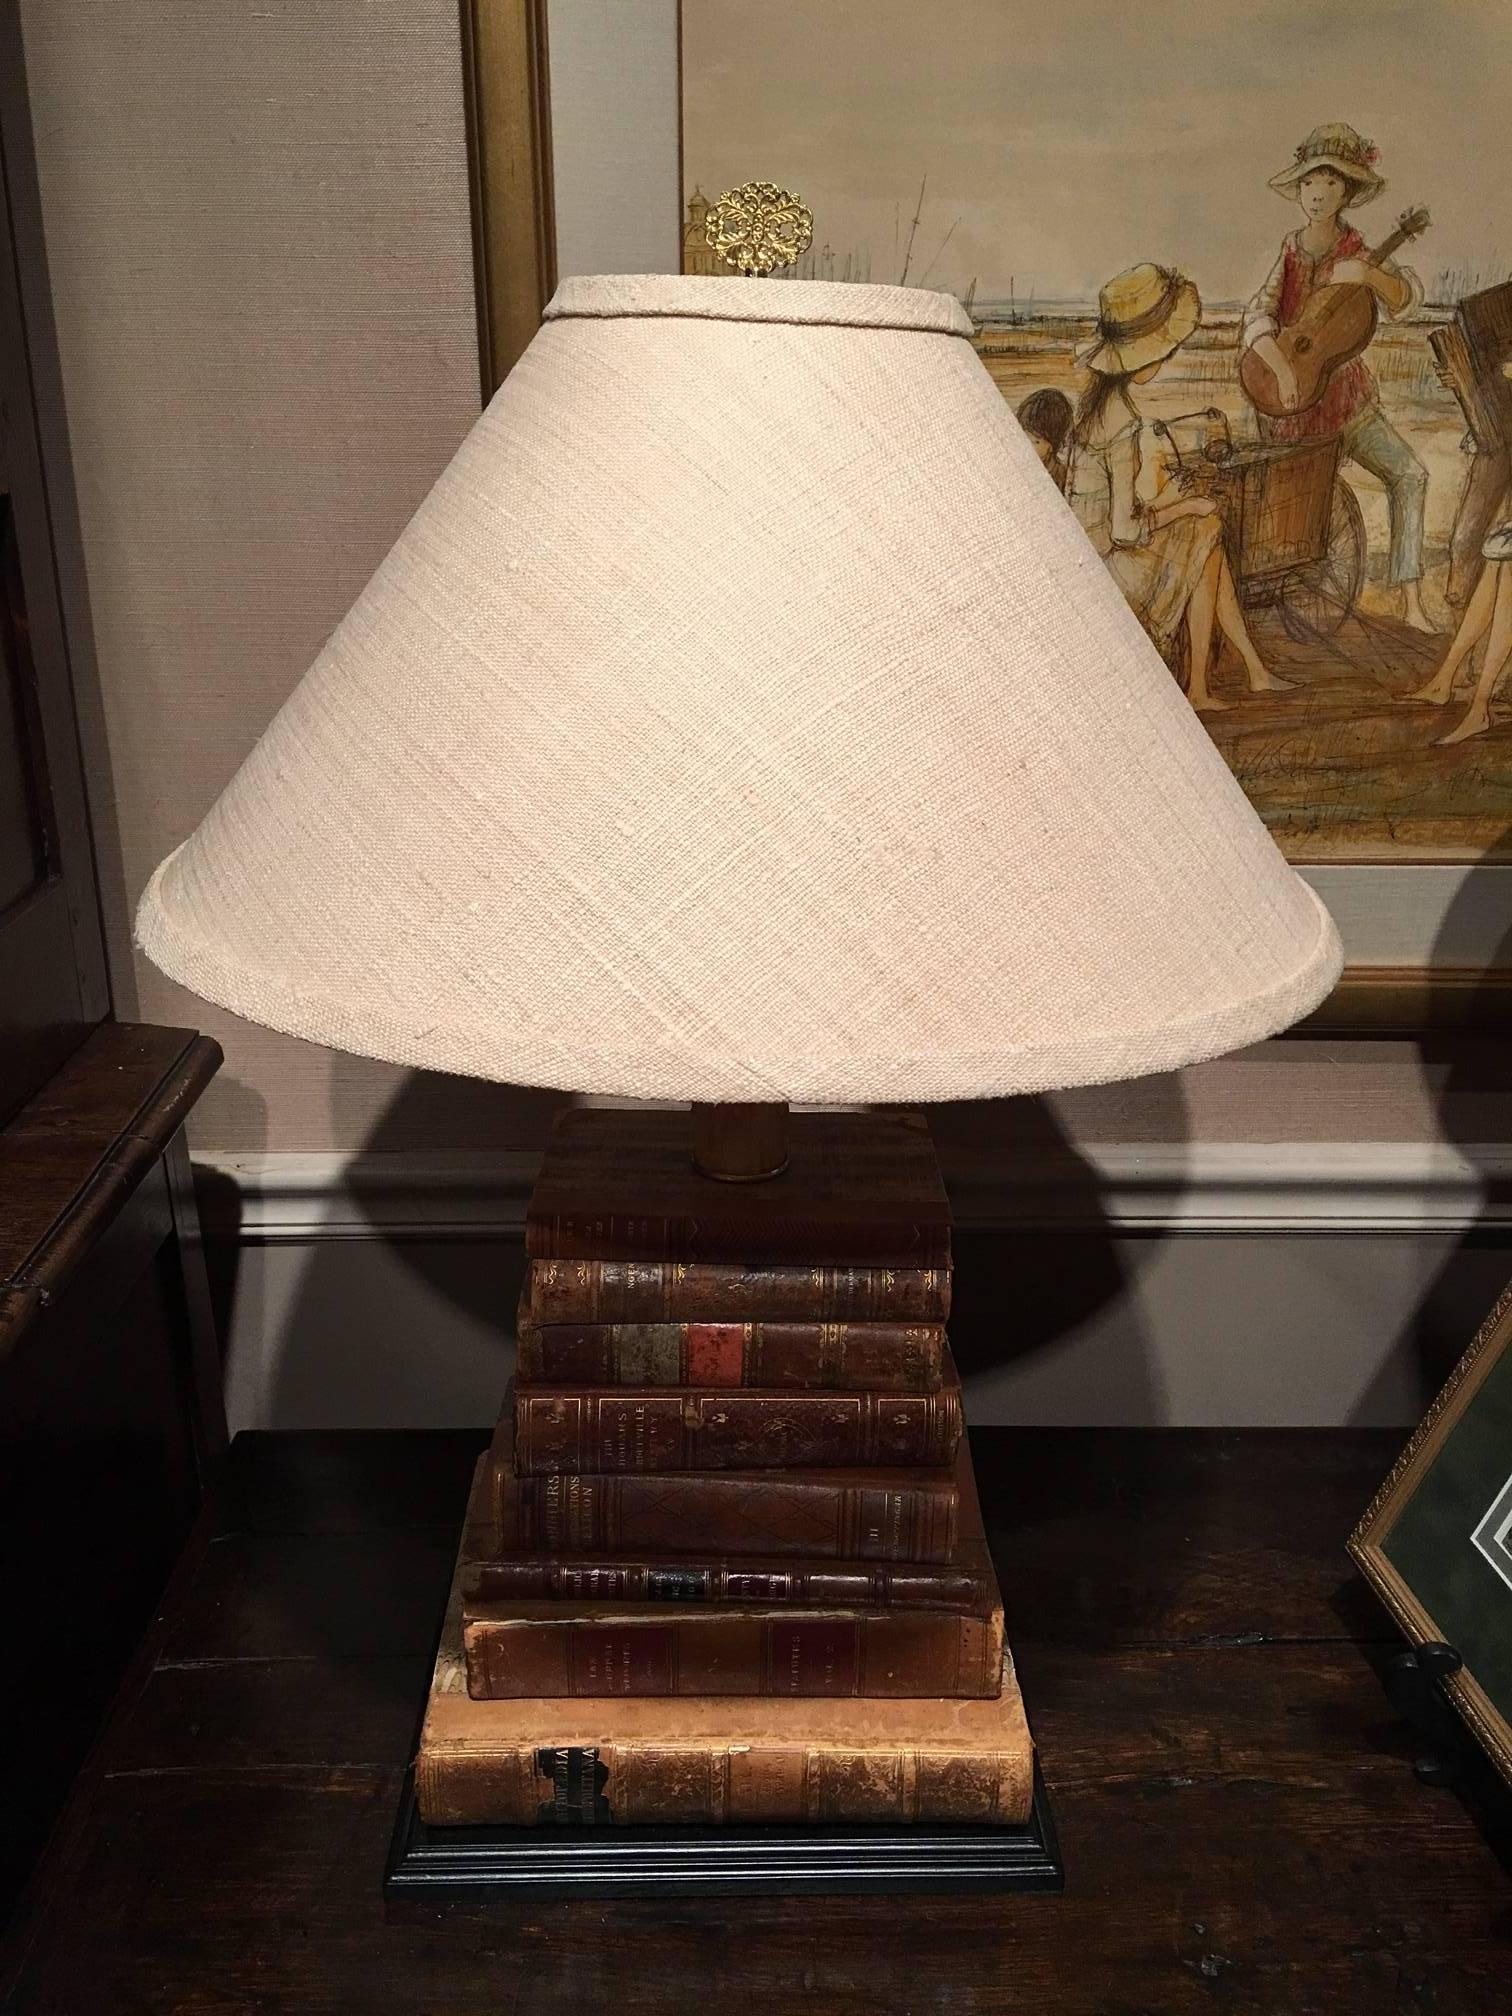 Pair of 18th and 19th century antique books mounted as lamps with linen shades and beeswax sleeves. Wood bases are 12.5